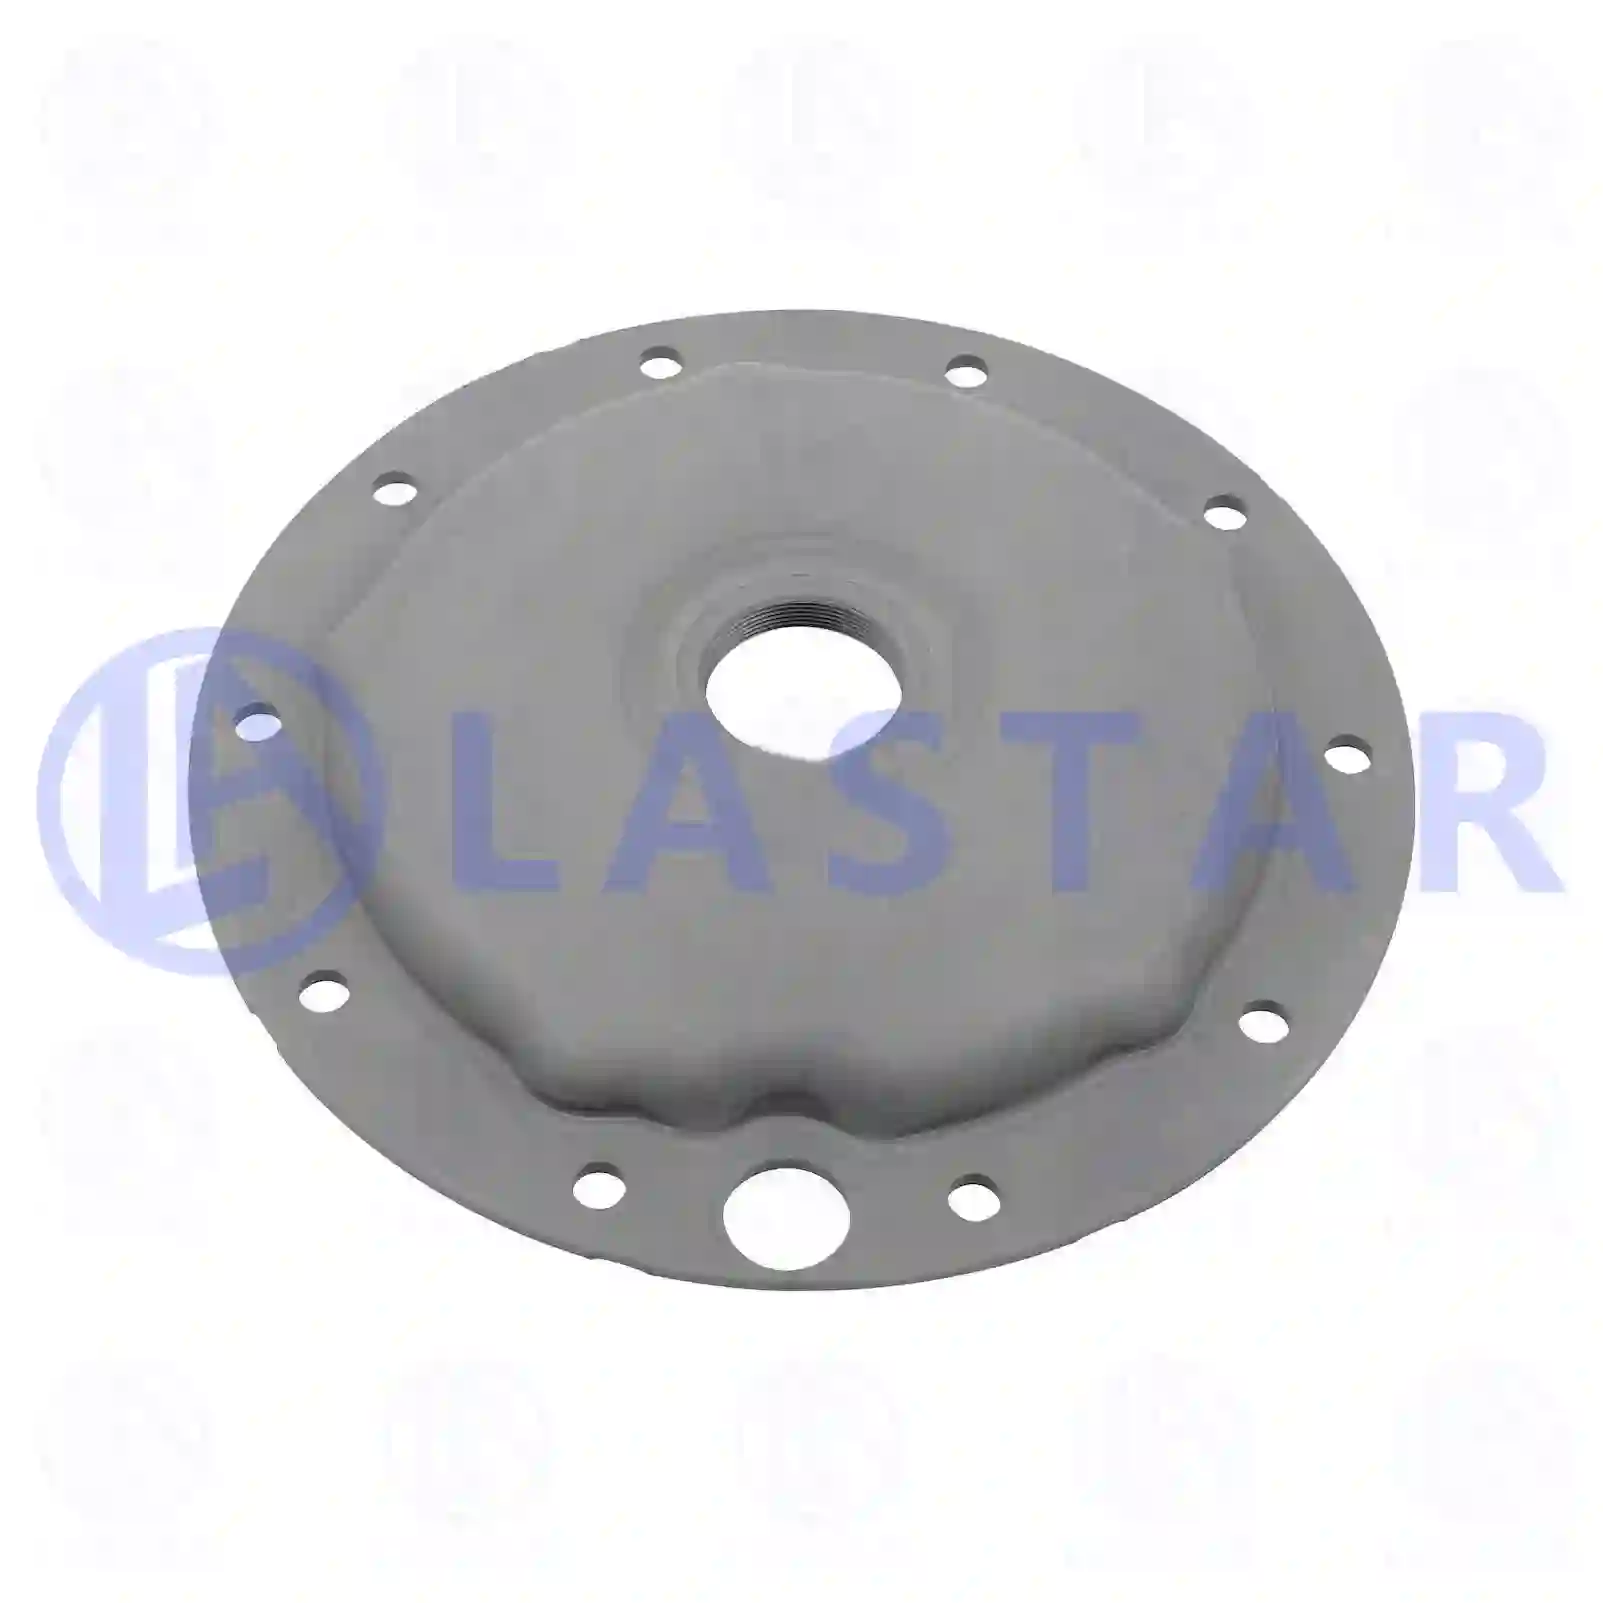 Hub cover, 77726319, 6243560020 ||  77726319 Lastar Spare Part | Truck Spare Parts, Auotomotive Spare Parts Hub cover, 77726319, 6243560020 ||  77726319 Lastar Spare Part | Truck Spare Parts, Auotomotive Spare Parts